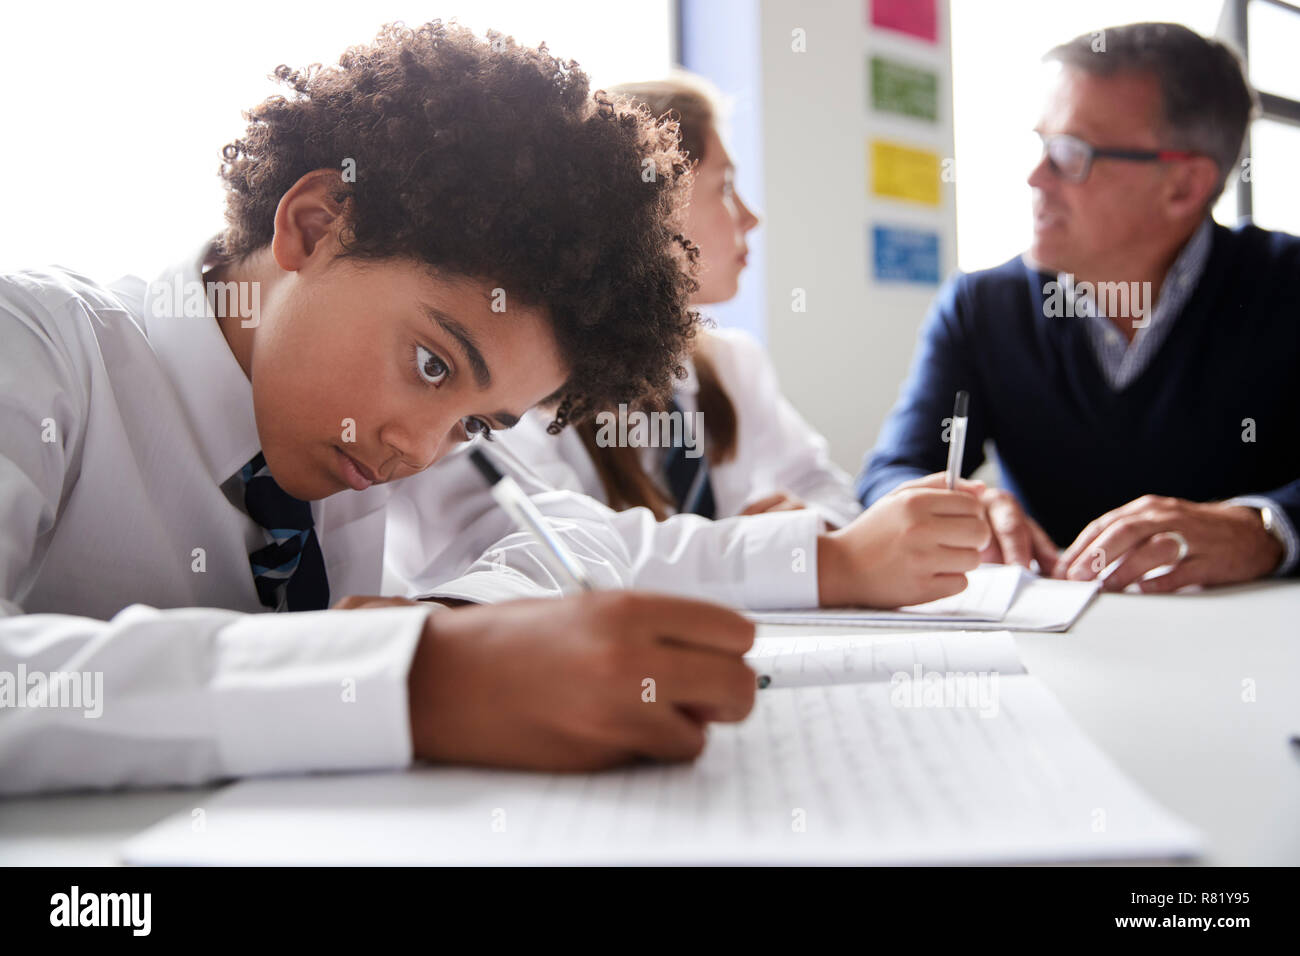 Male High School Student Wearing Uniform Working At Table With Teacher Talking To Pupils In Background Stock Photo